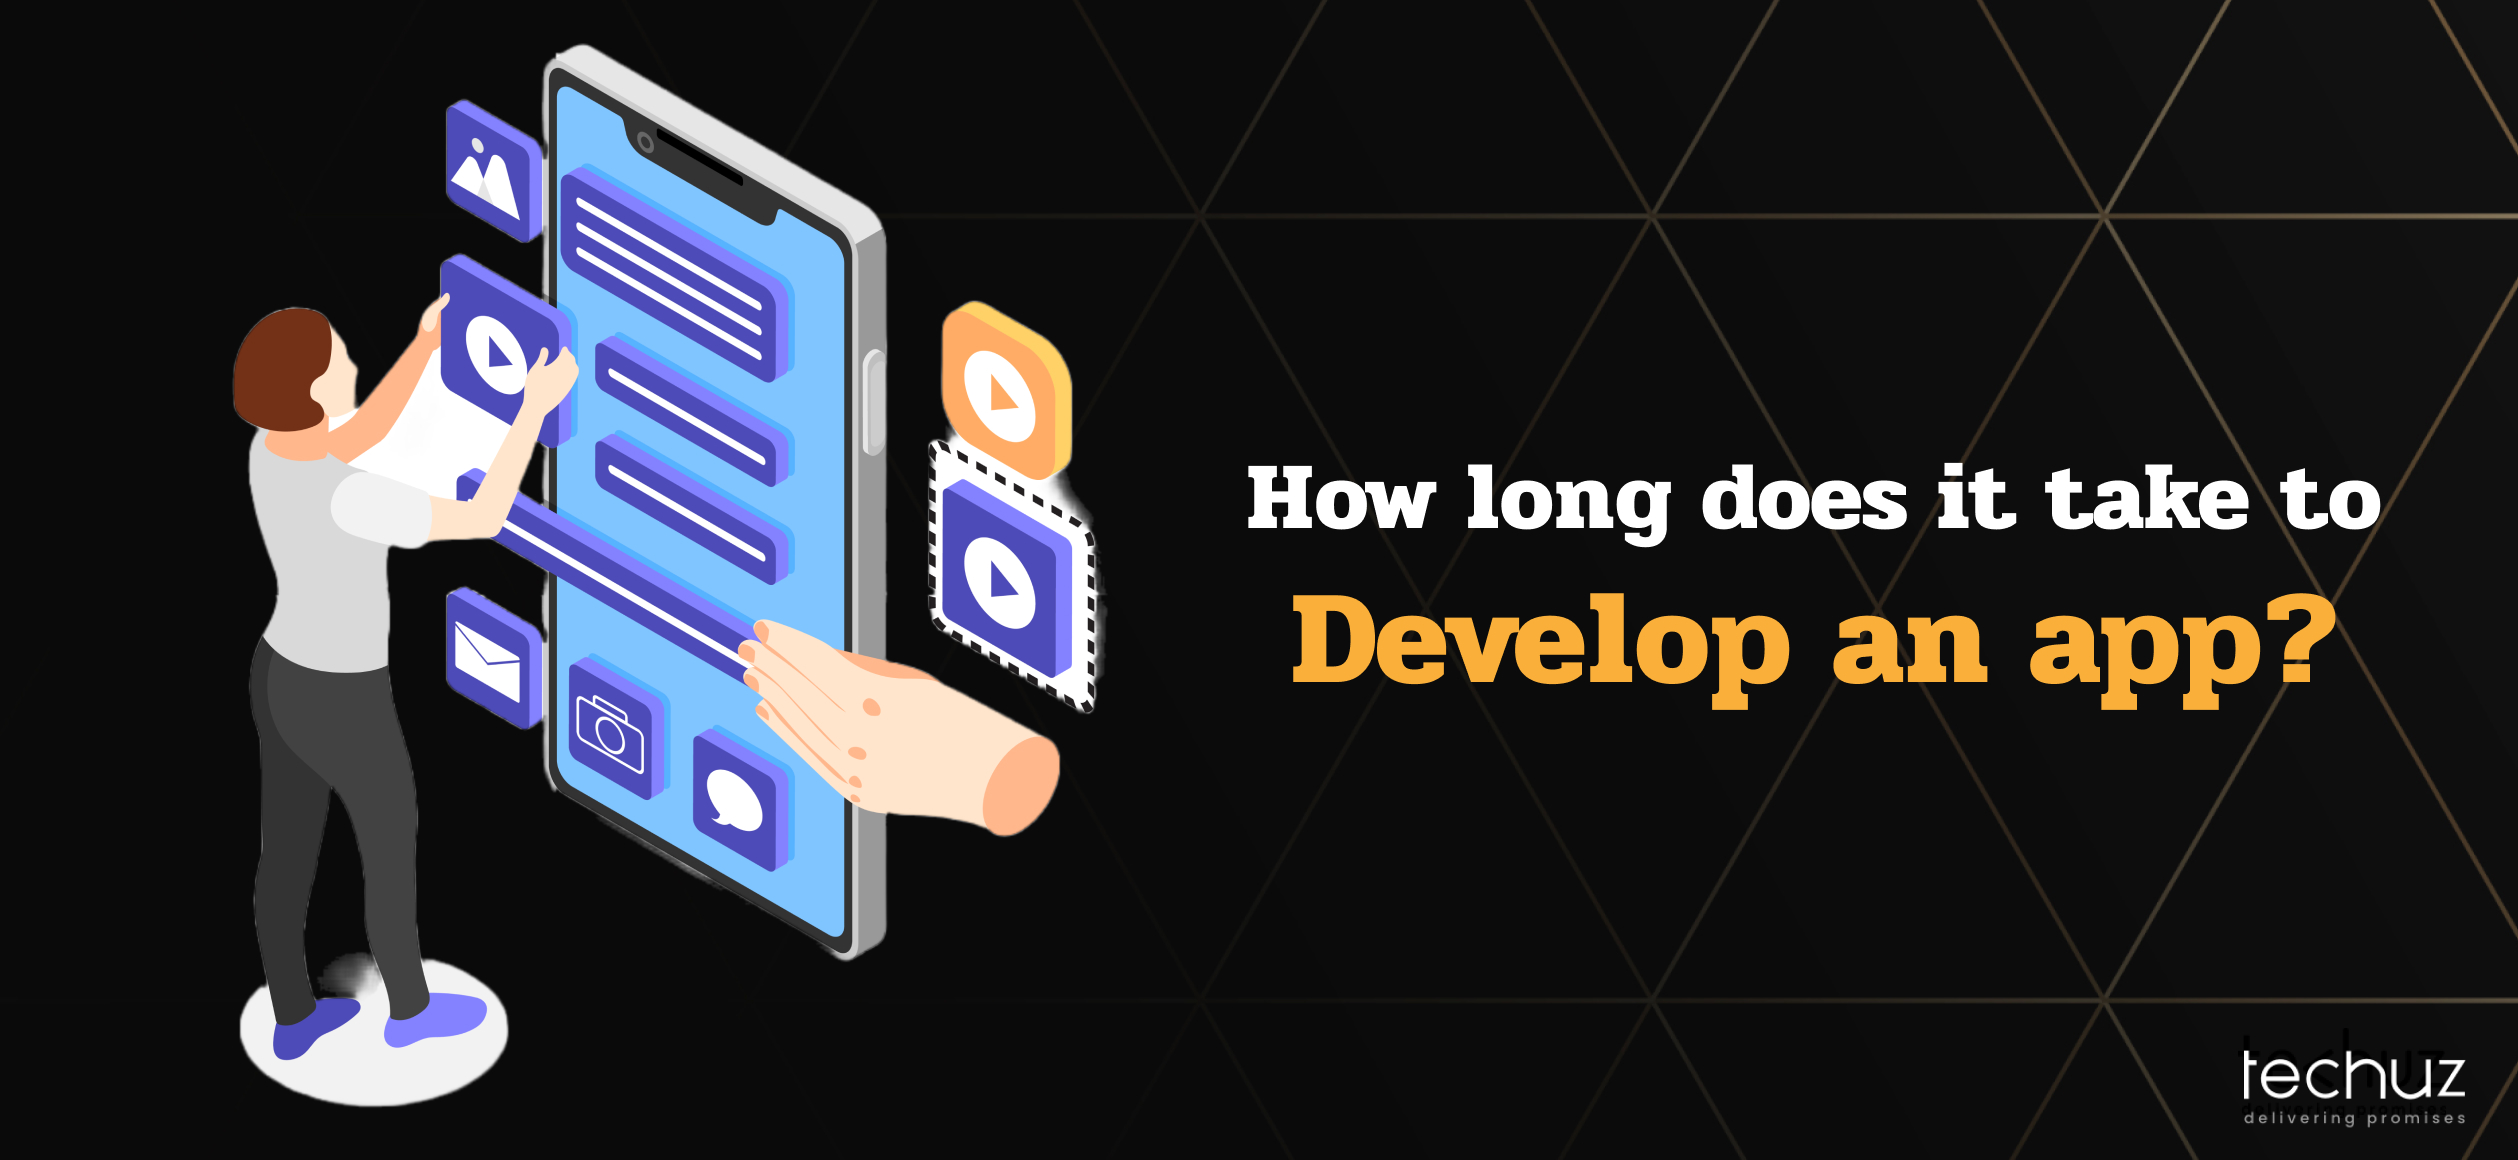 How Long Does it Take to Develop an App?